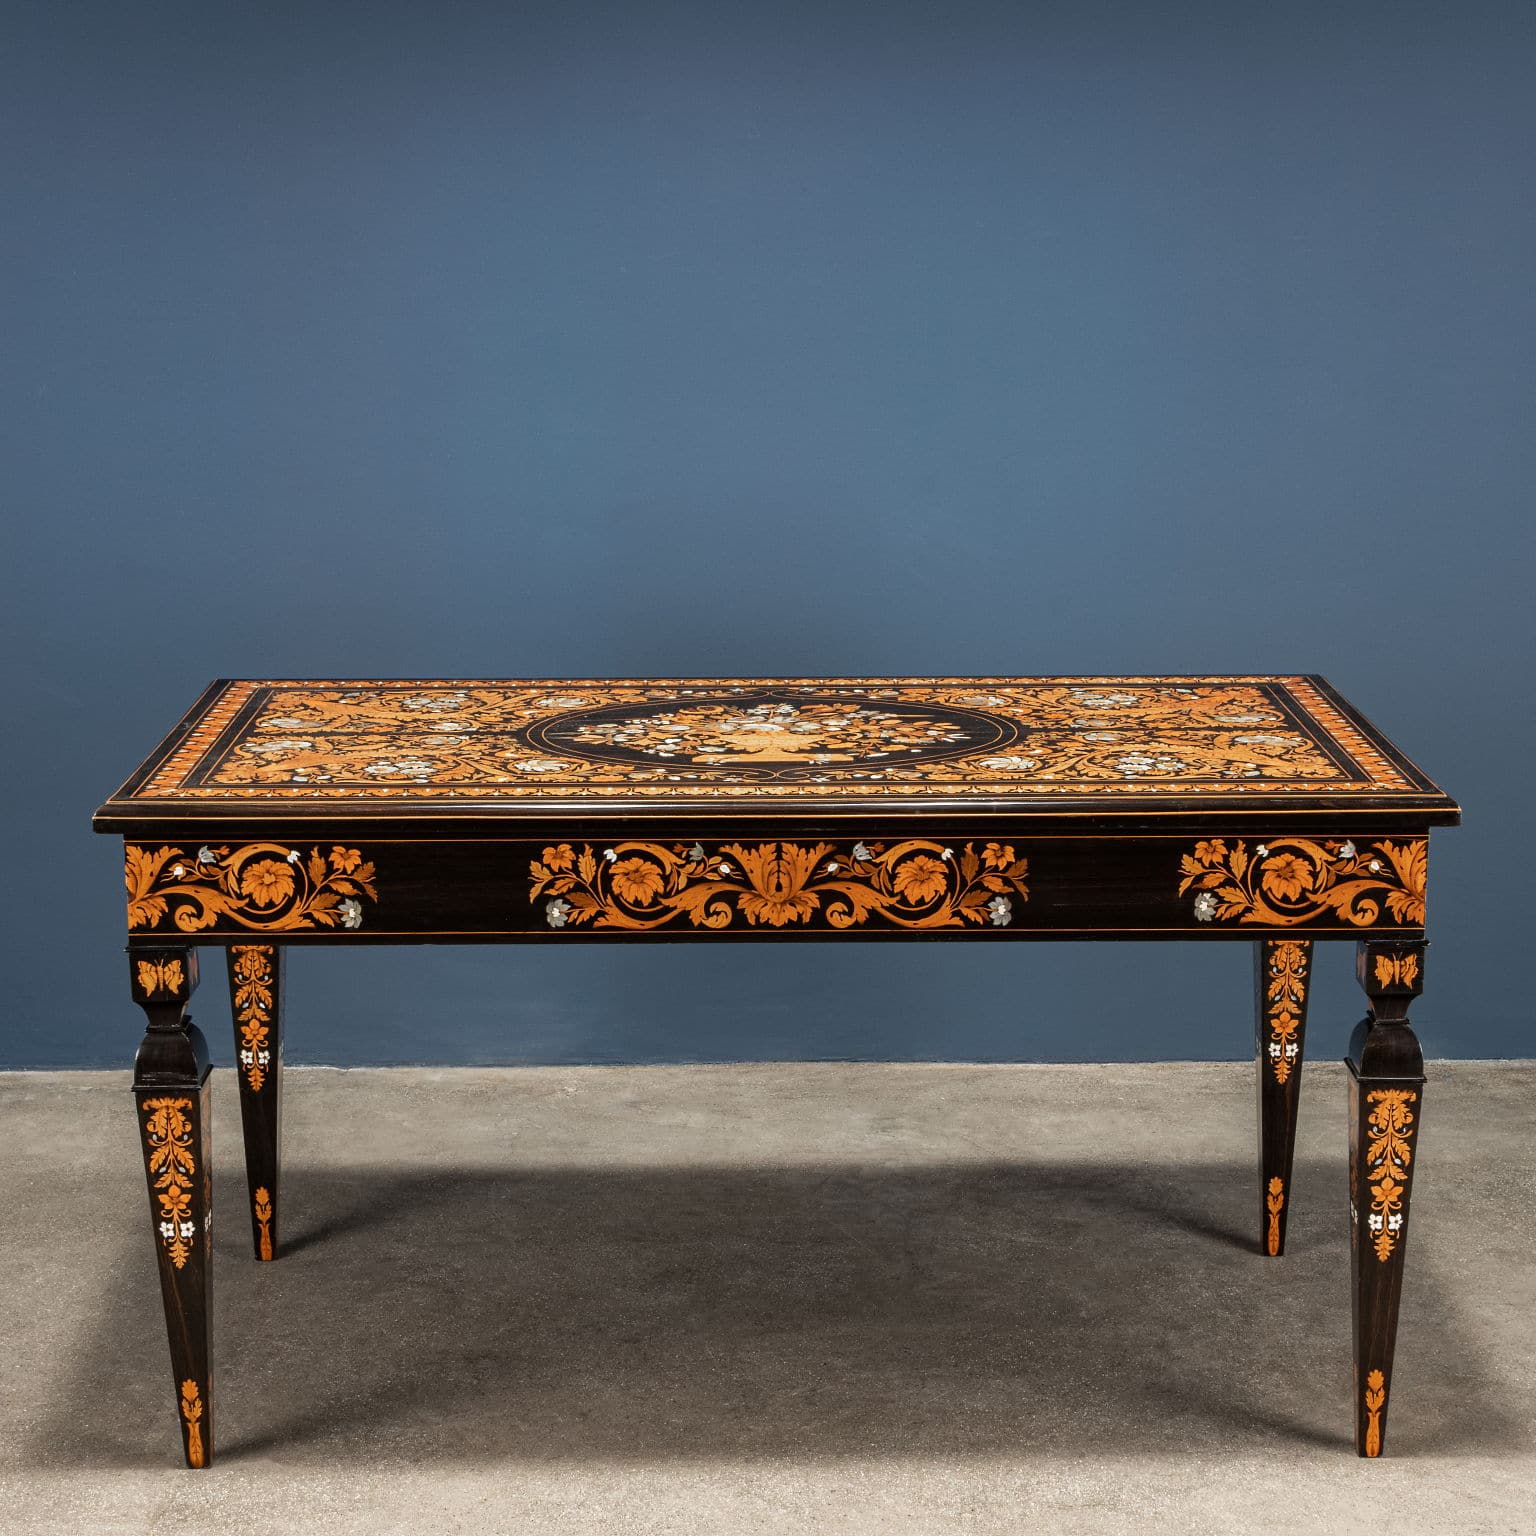 Table, attributable to Luigi and Angiolo Falcini, Florence, second quarter of the 19th century